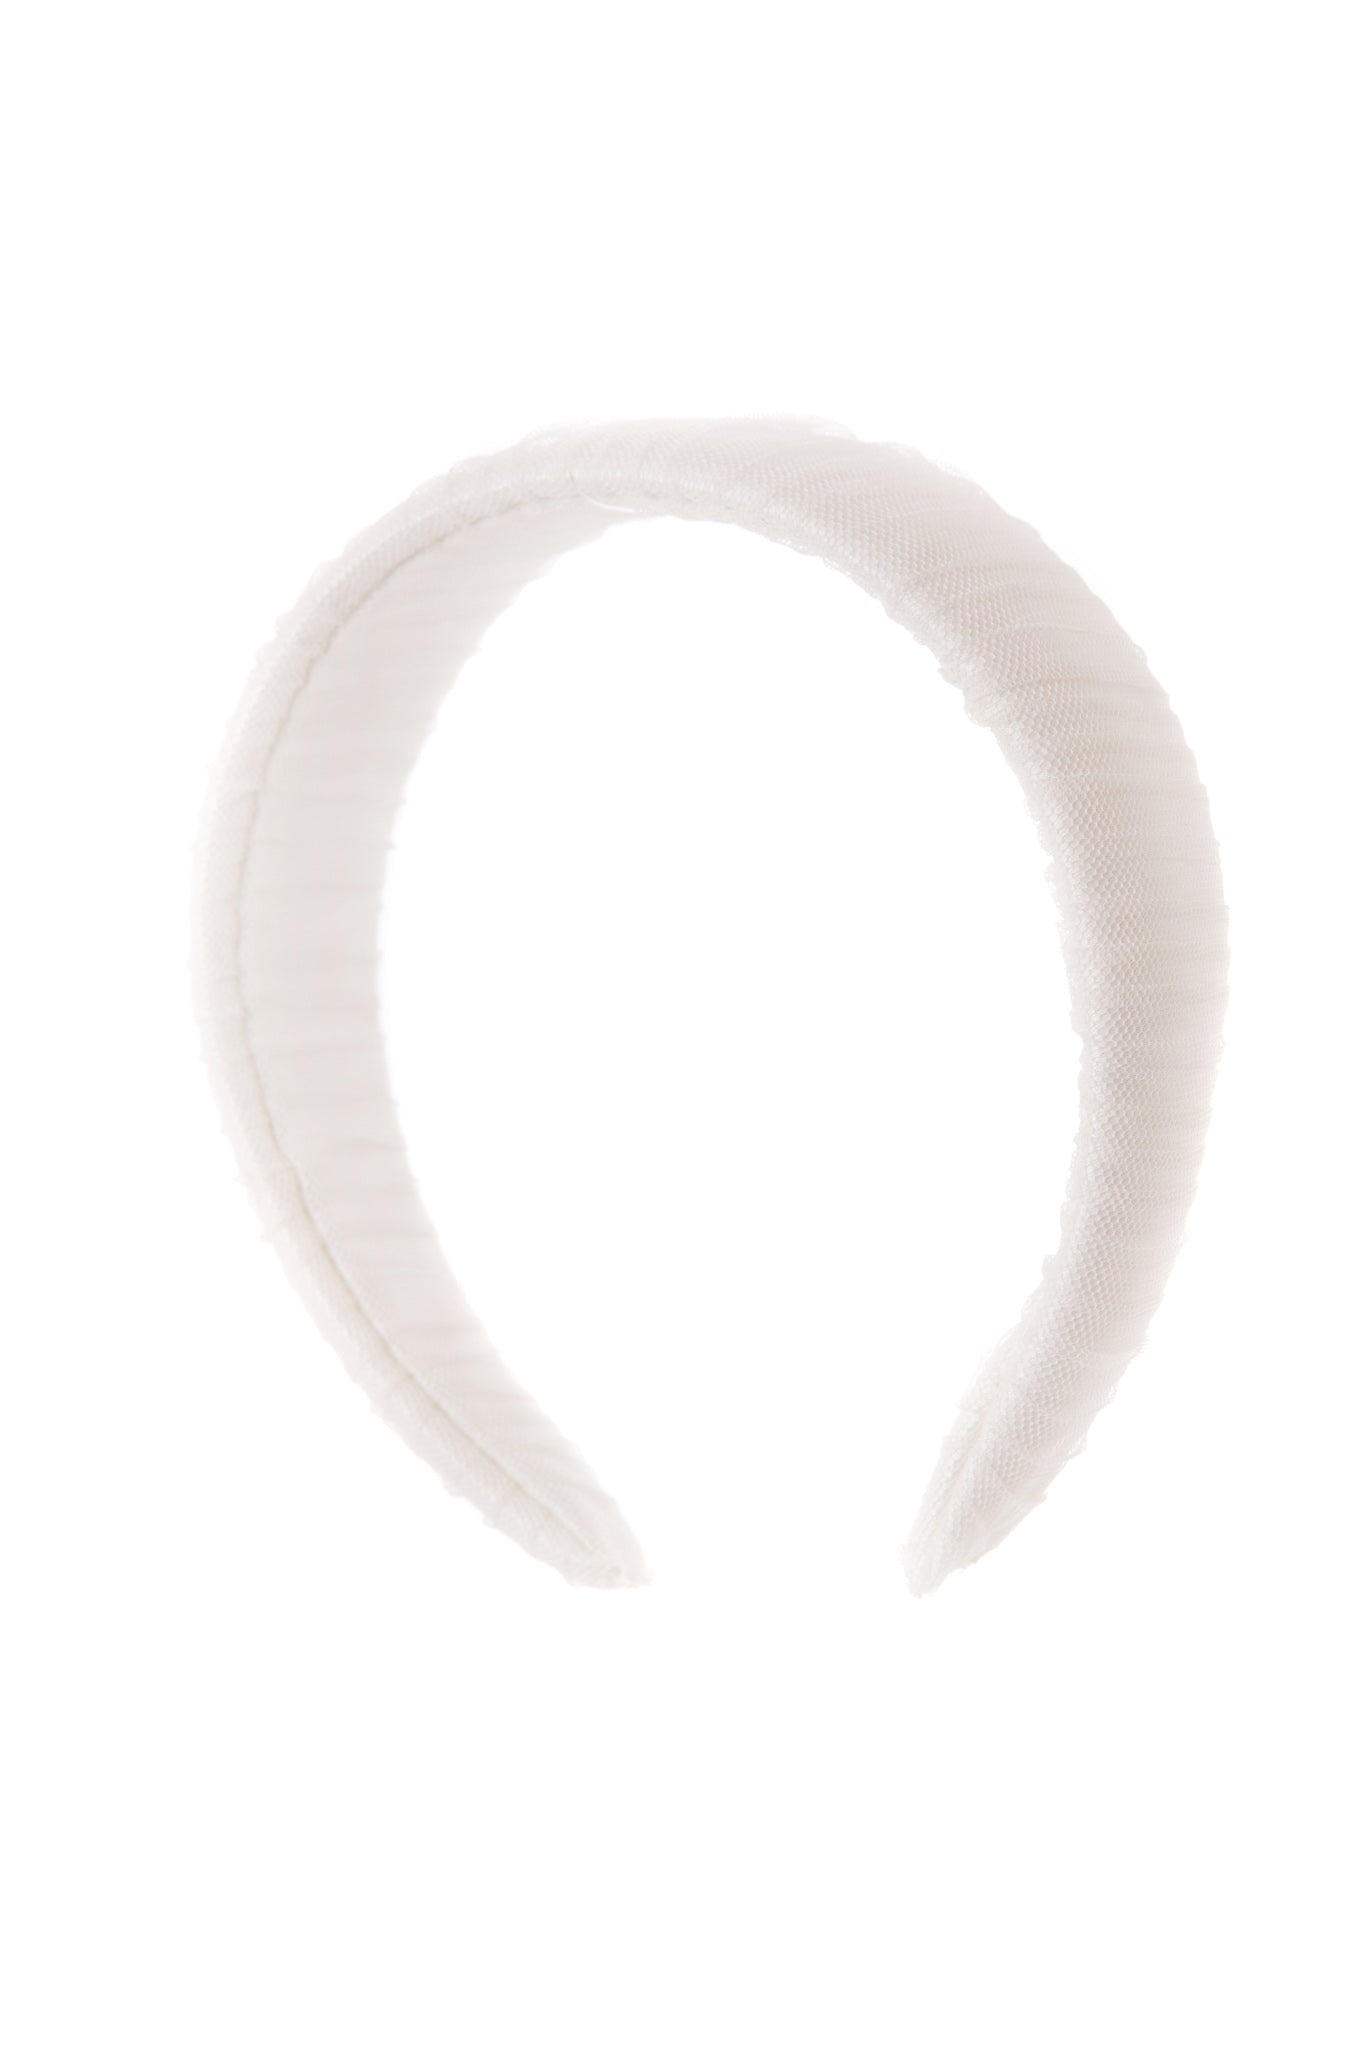 This hair accessory is crafted of luxurious ivory pleated tulle, providing a versatile and comfortable look suitable for any occasion.